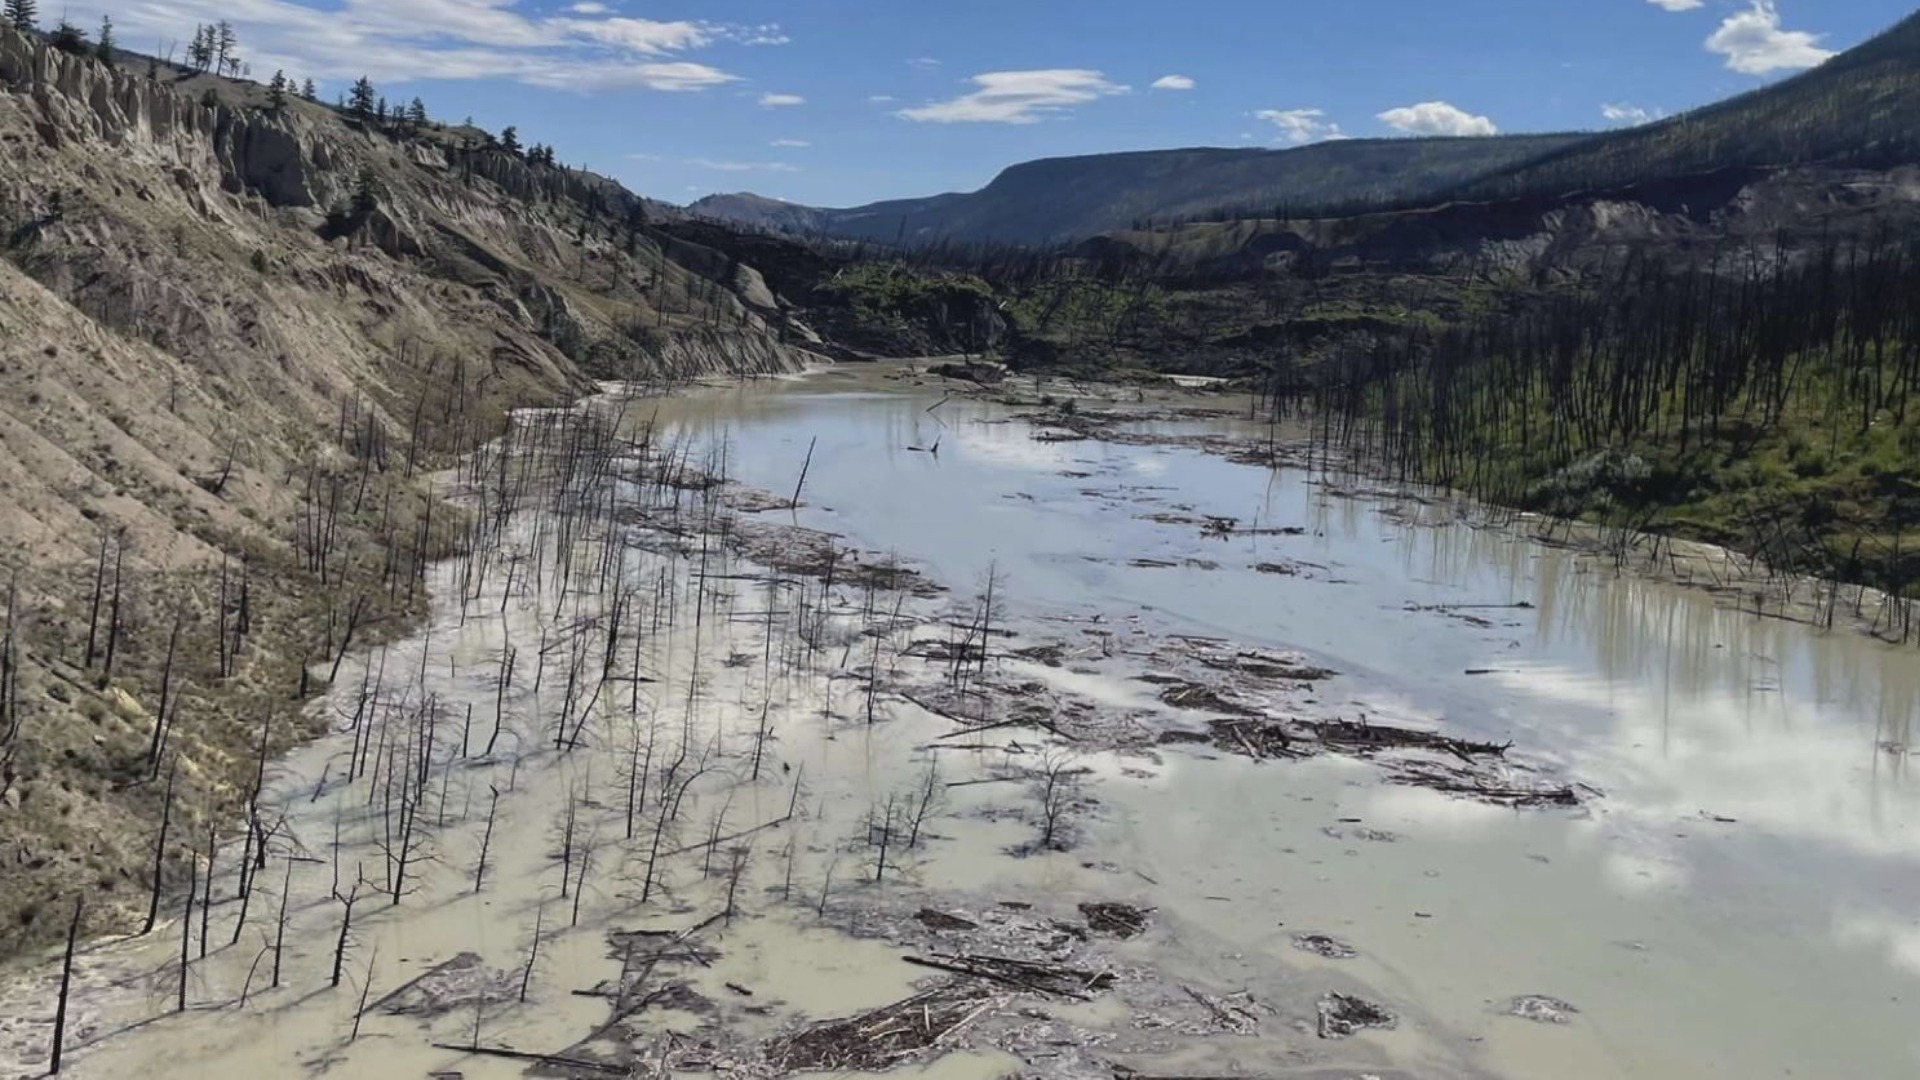 Dam overflow seems more likely than sudden dam break on Chilcotin River, says province